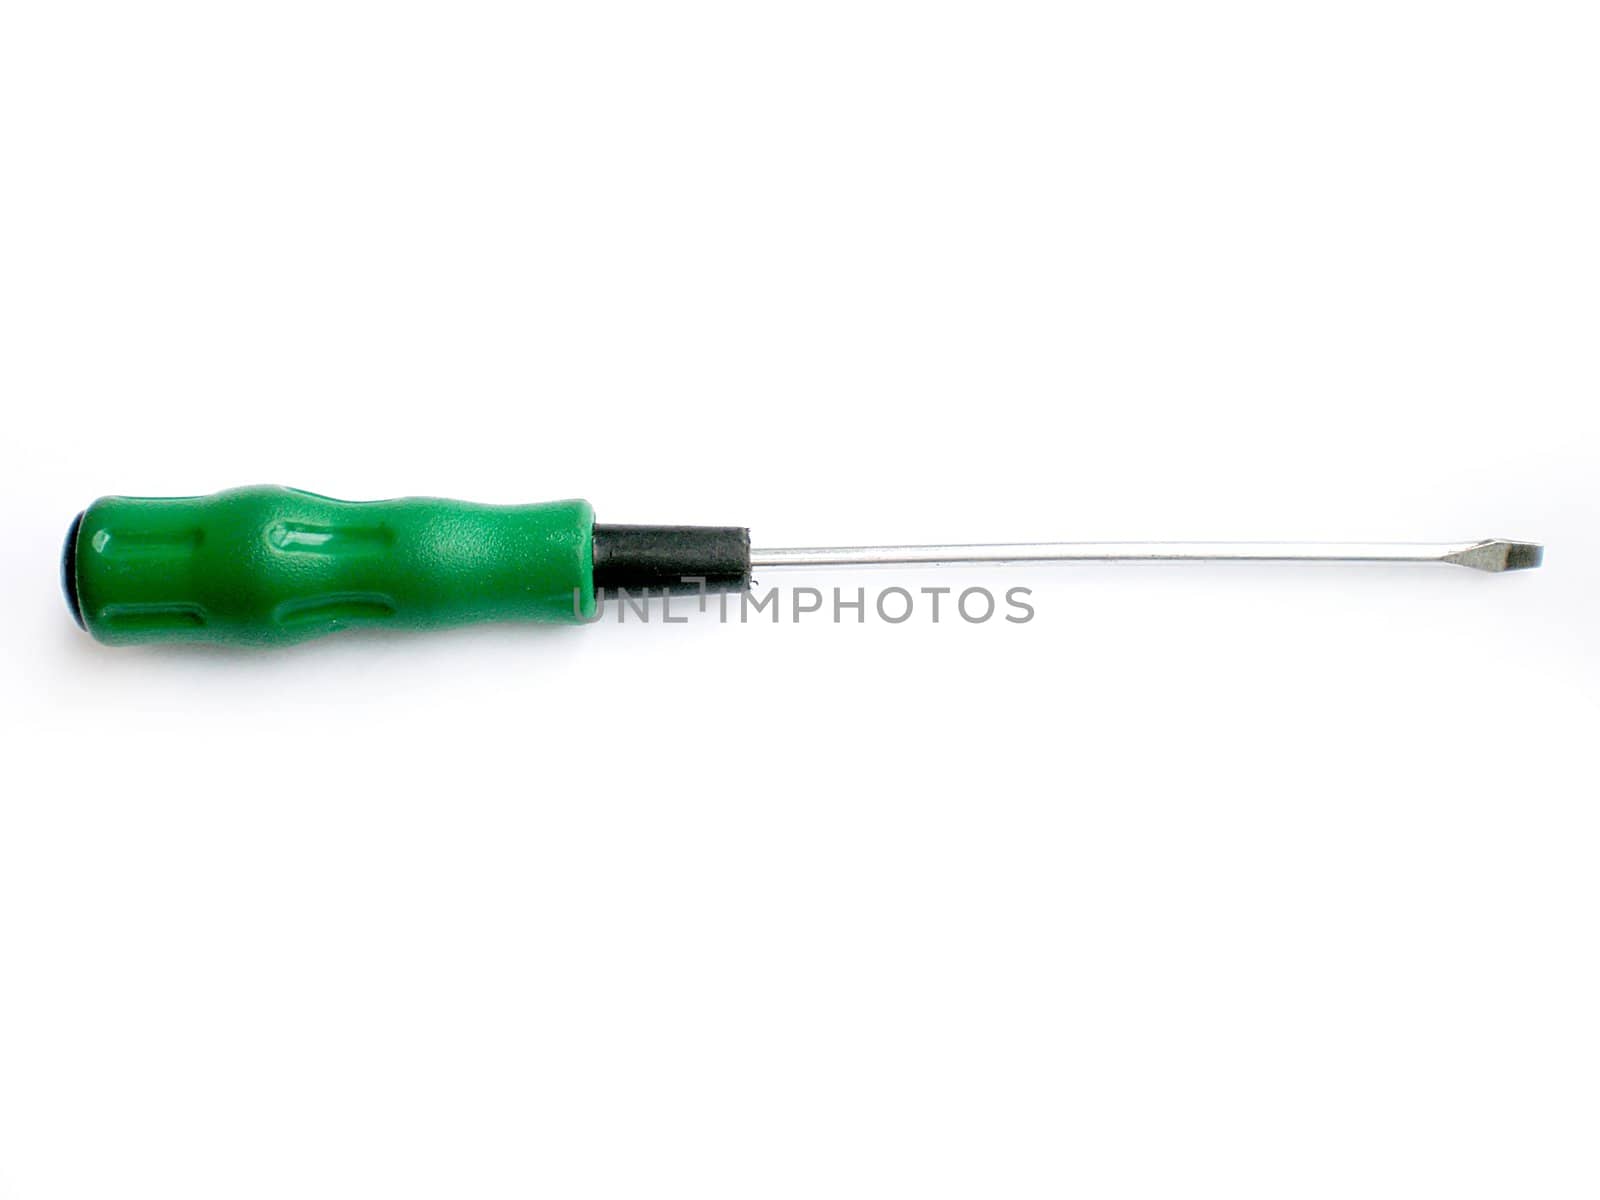 screwdriver on white background